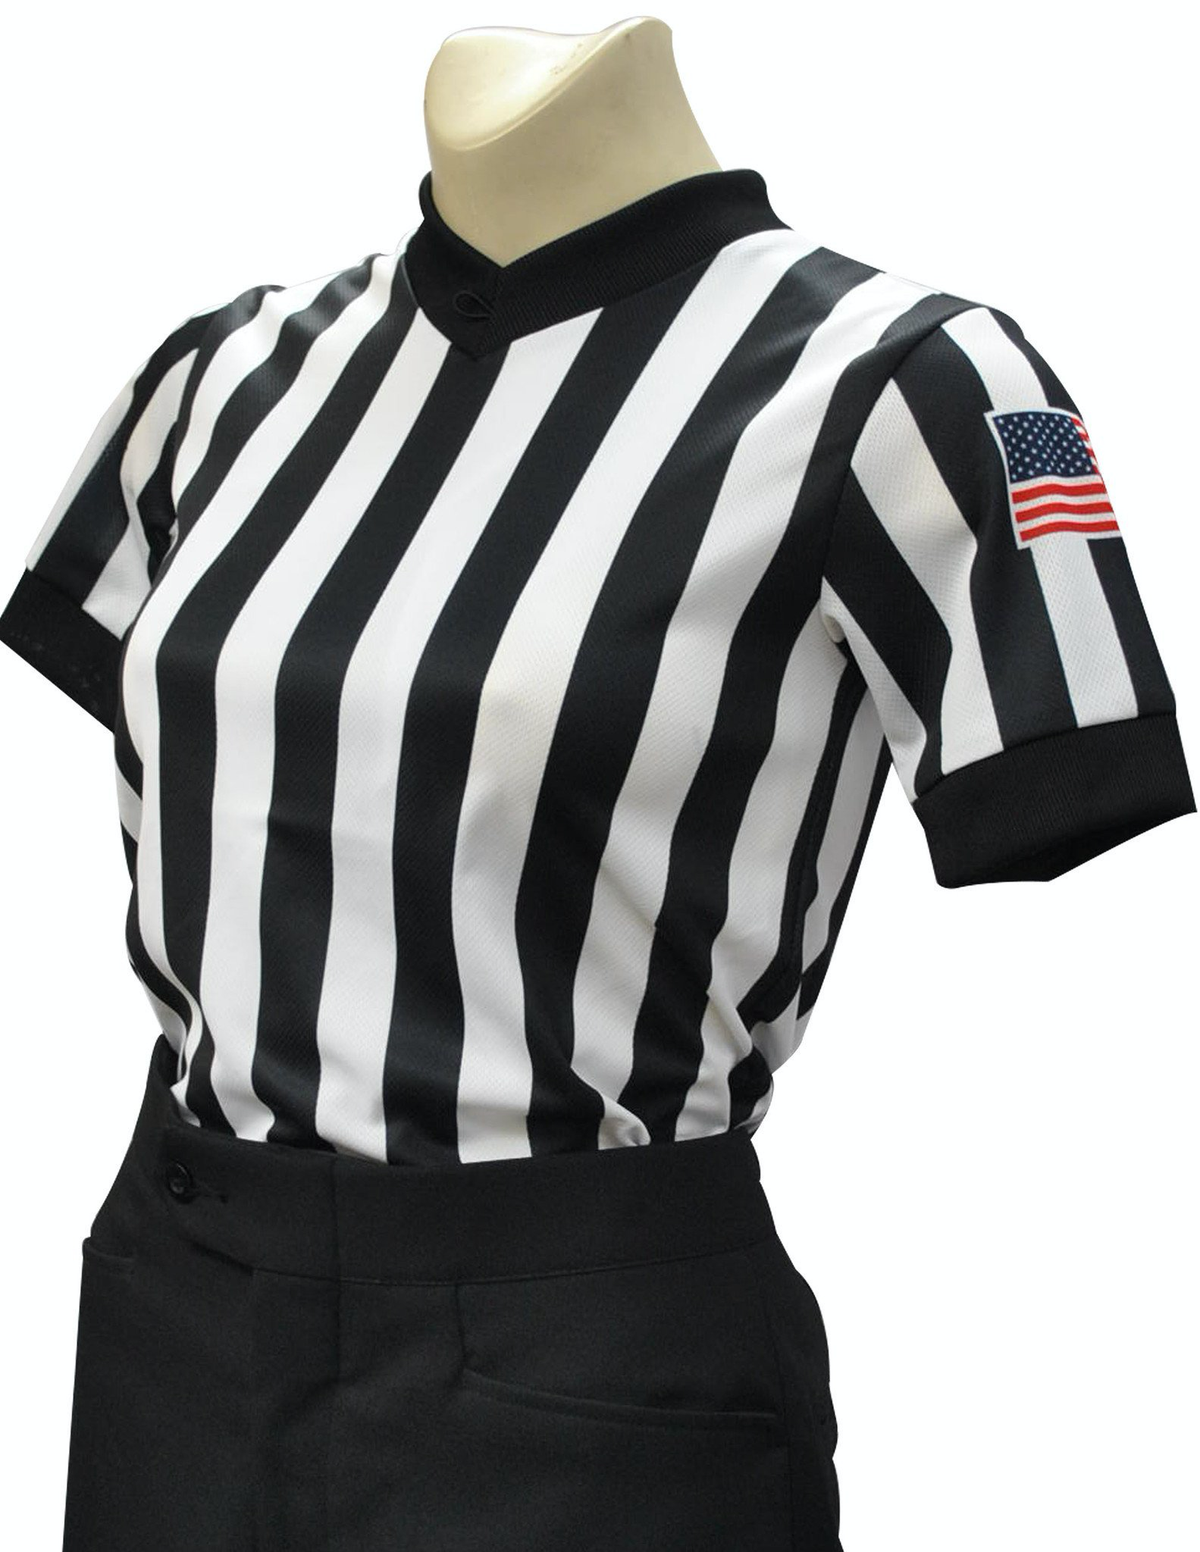 Smitty | USA-211-607 | Women's "BODY FLEX" Referee Shirt w/ Sublimated American Flag | Made in USA - Great Call Athletics